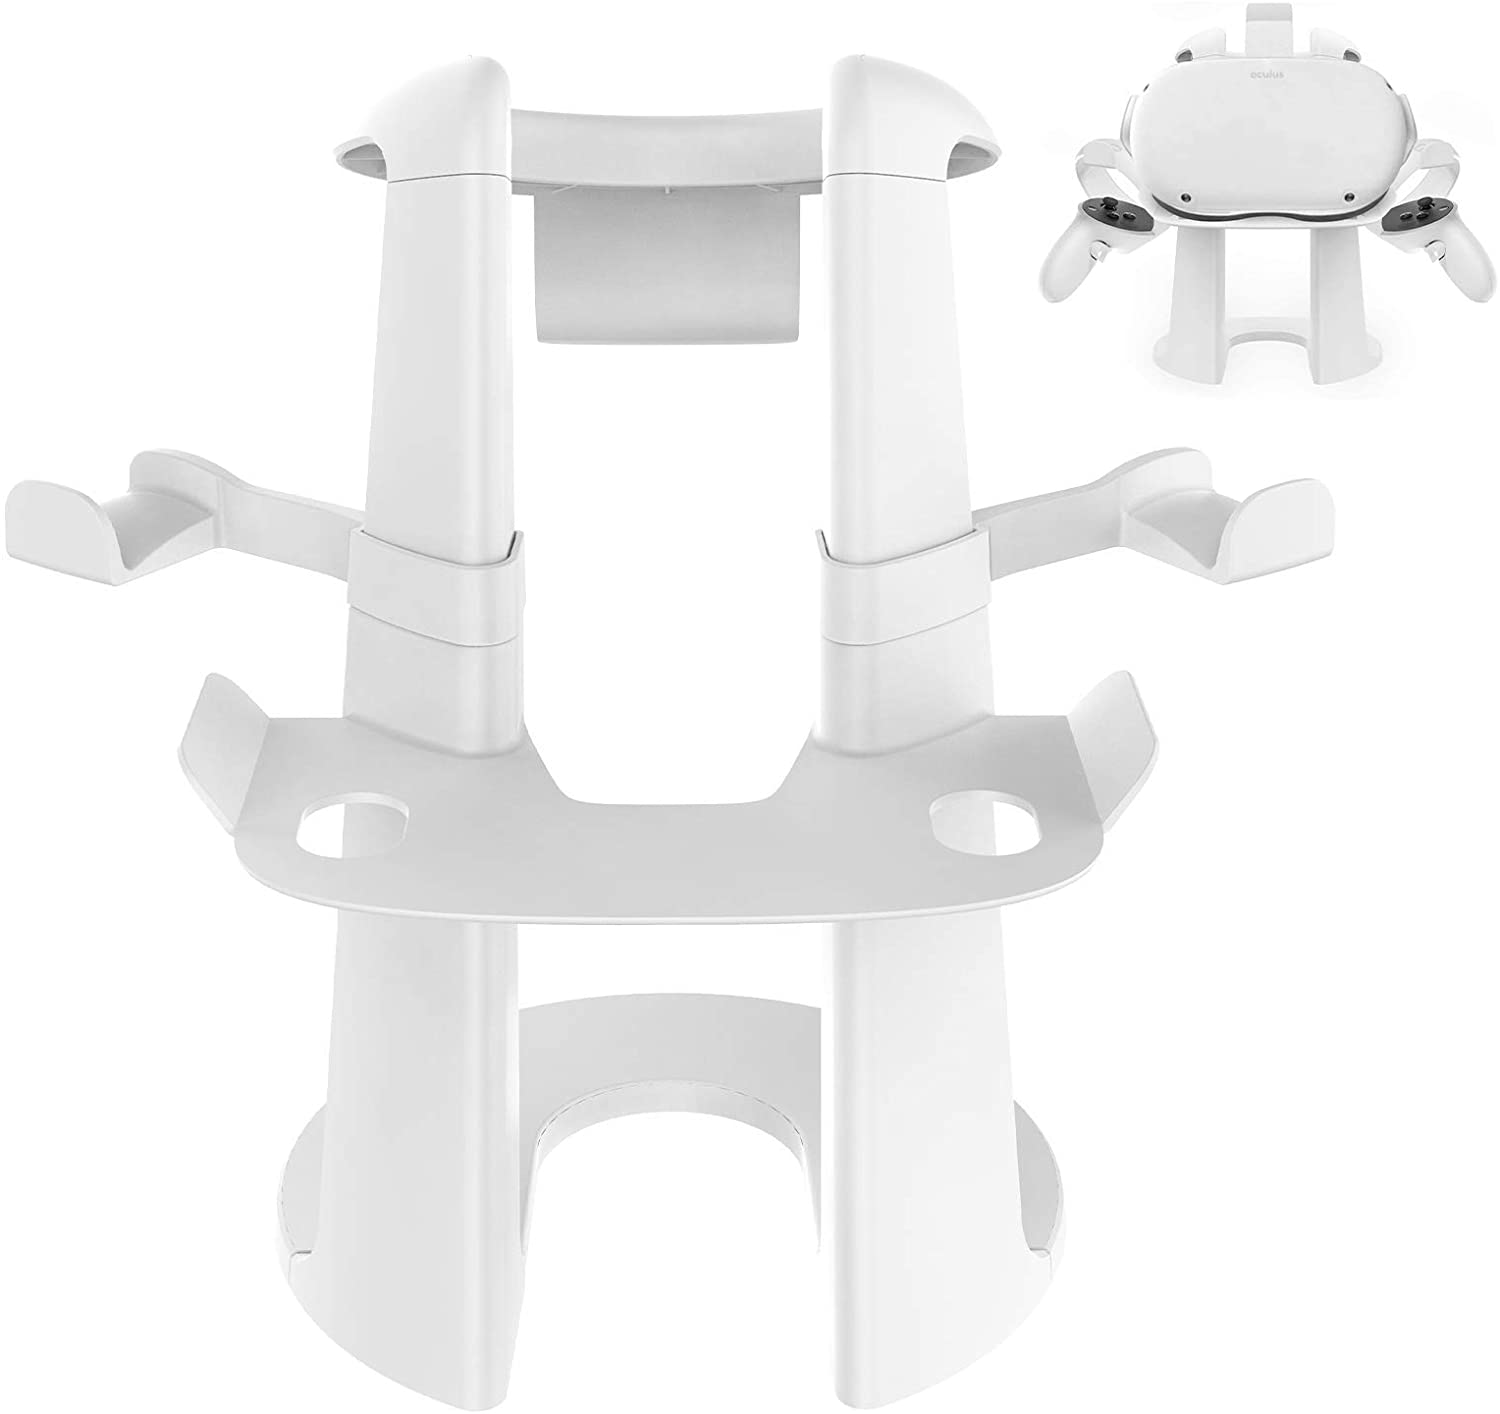 White VR headset and controller stand.